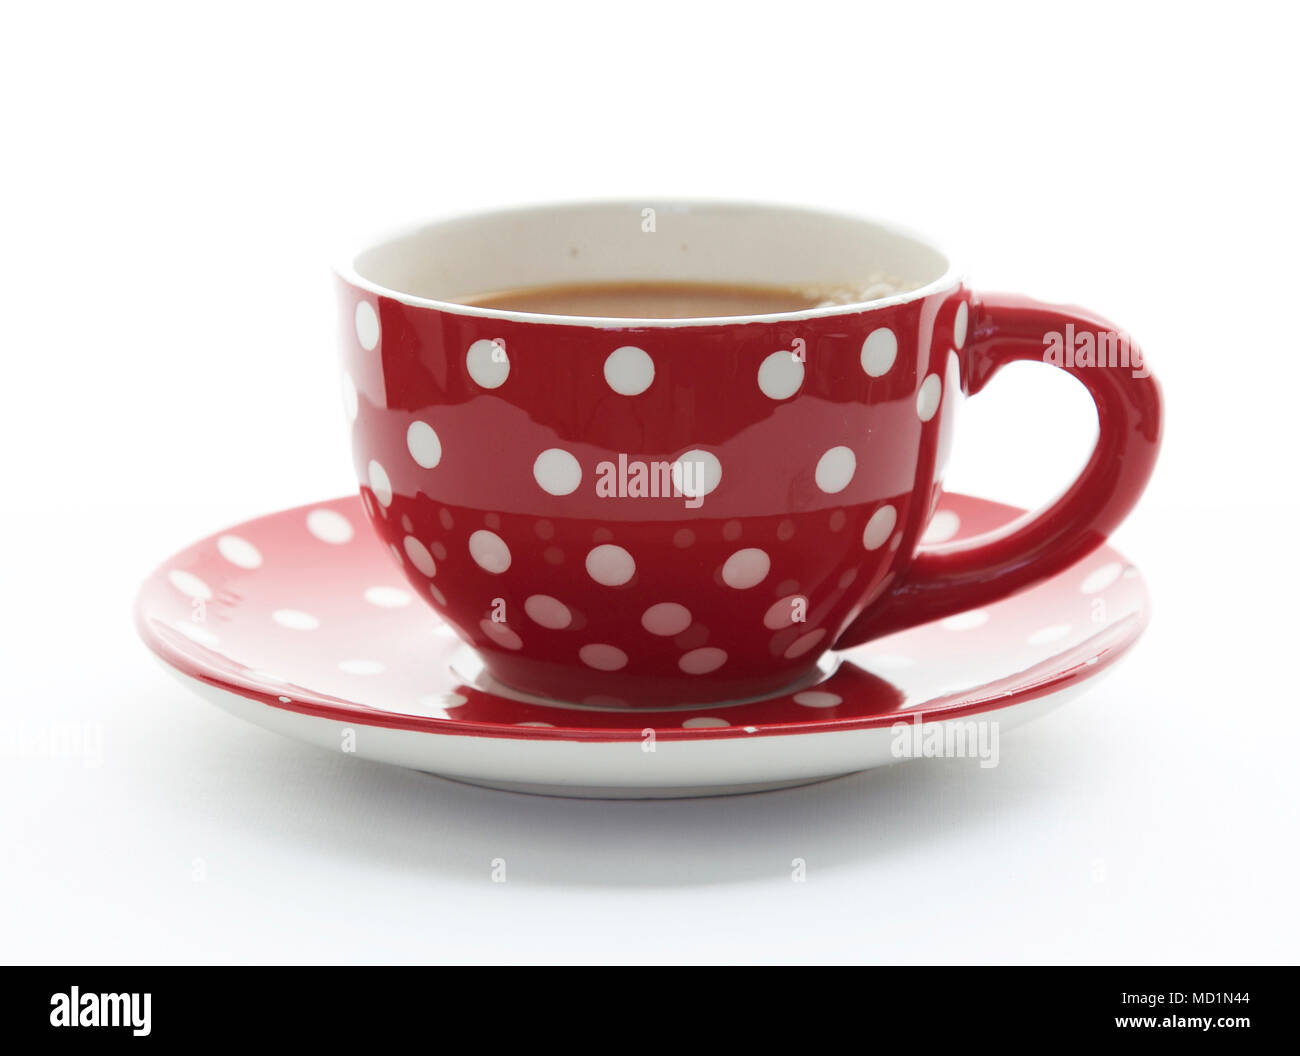 https://c8.alamy.com/comp/MD1N44/large-cup-of-tea-in-a-red-cup-with-white-dots-MD1N44.jpg